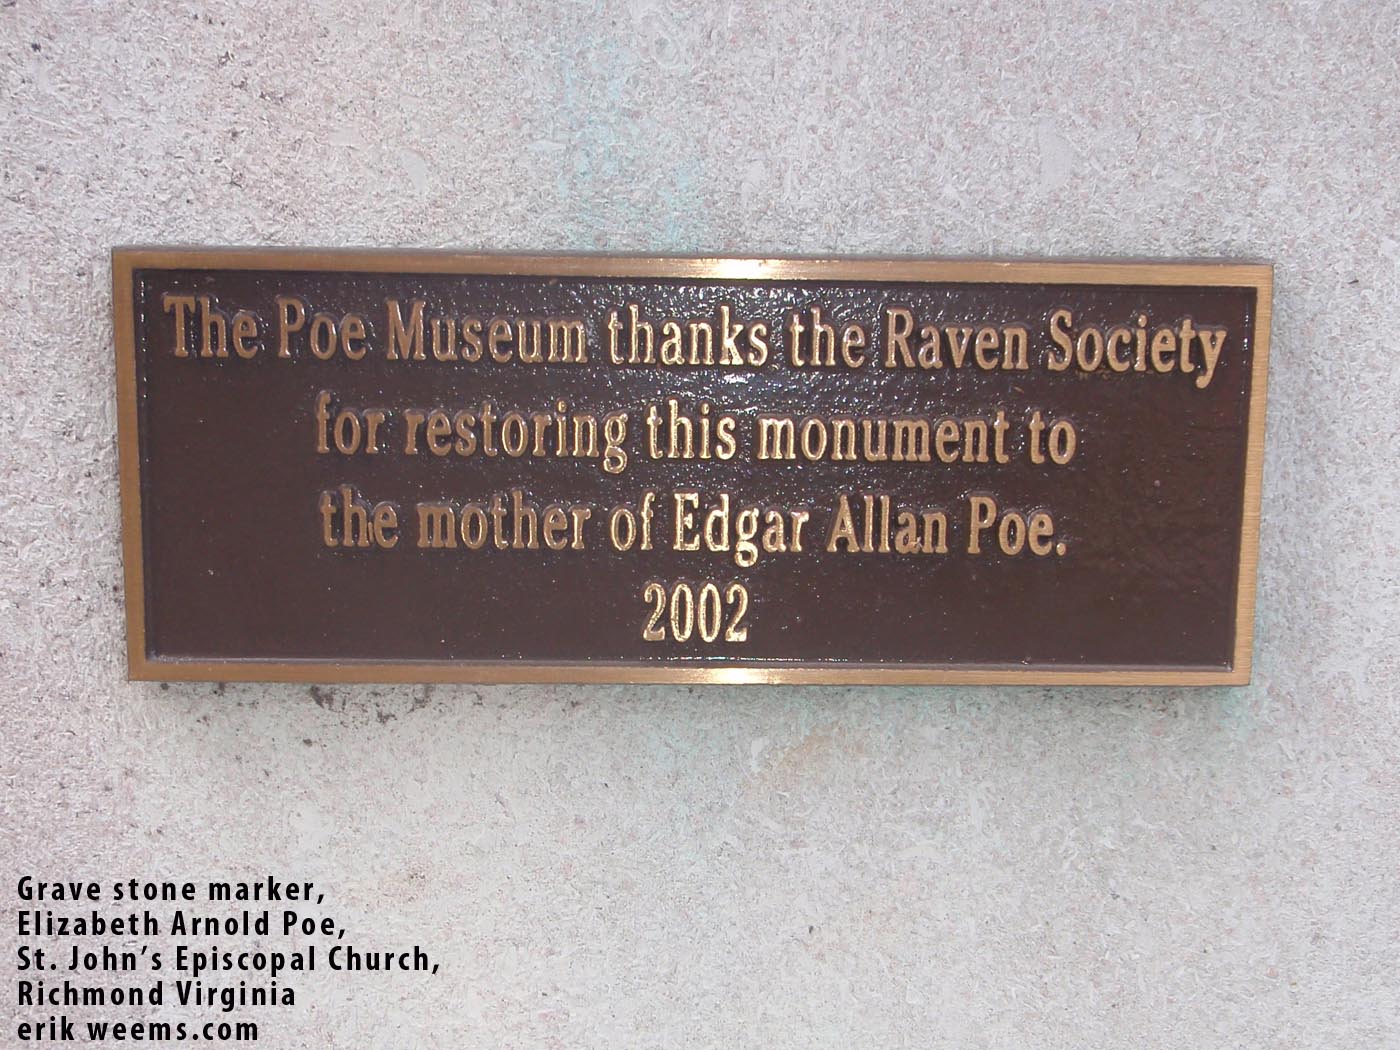 Raven Society plaque at the grave marker for Eliza Poe